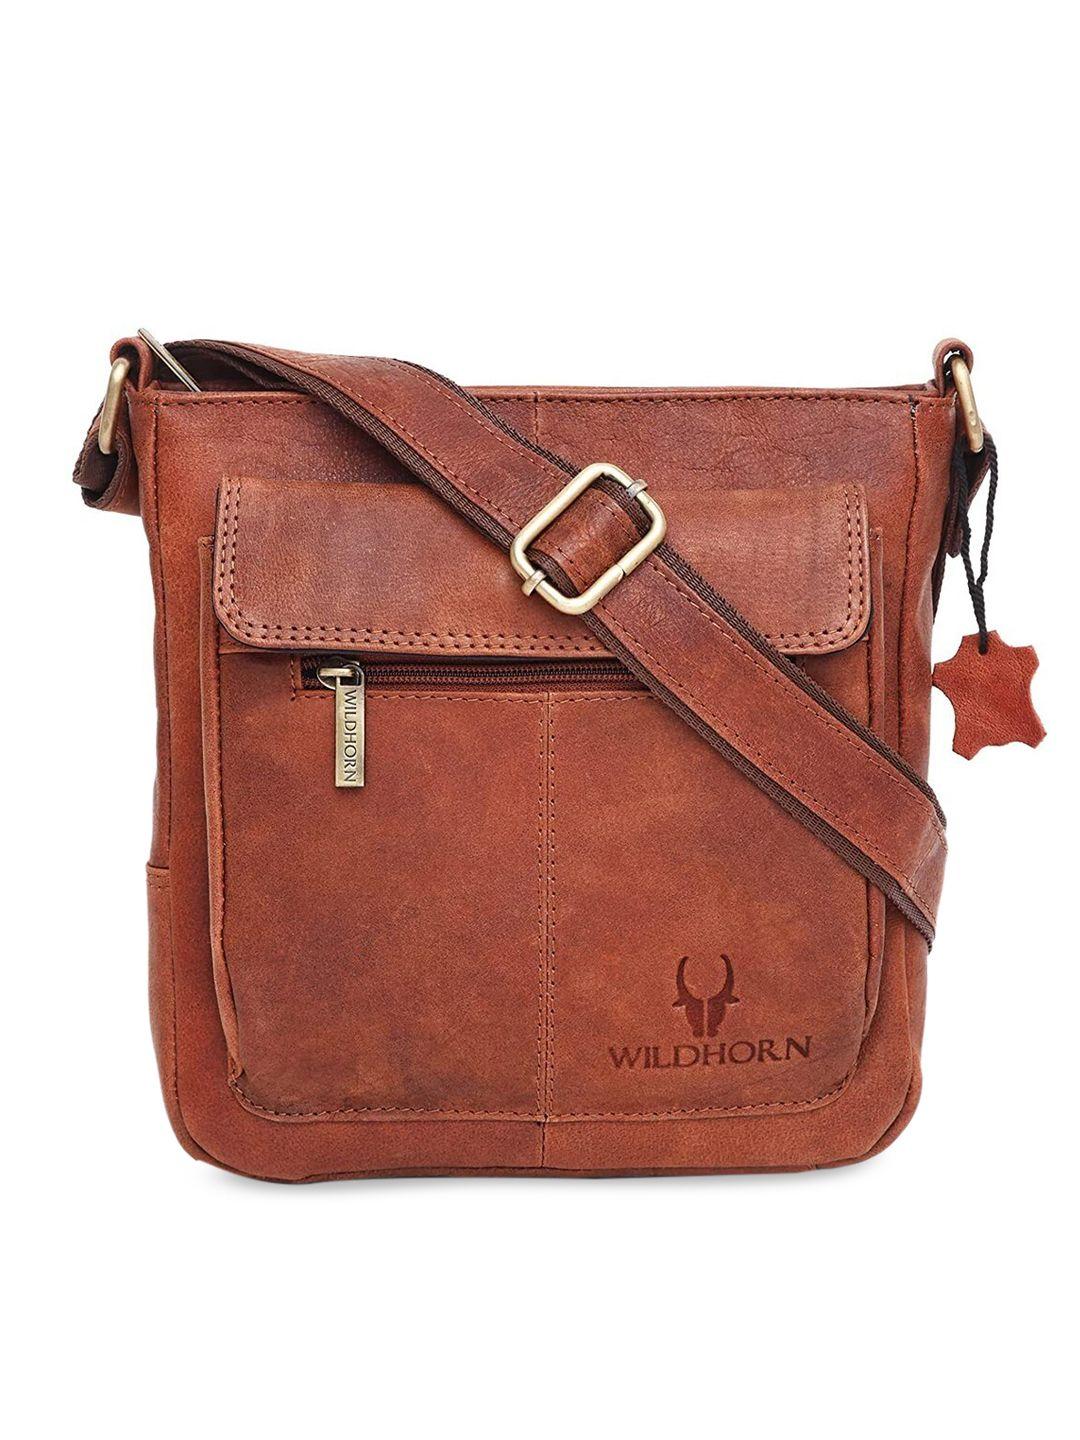 wildhorn tan textured leather structured sling bag